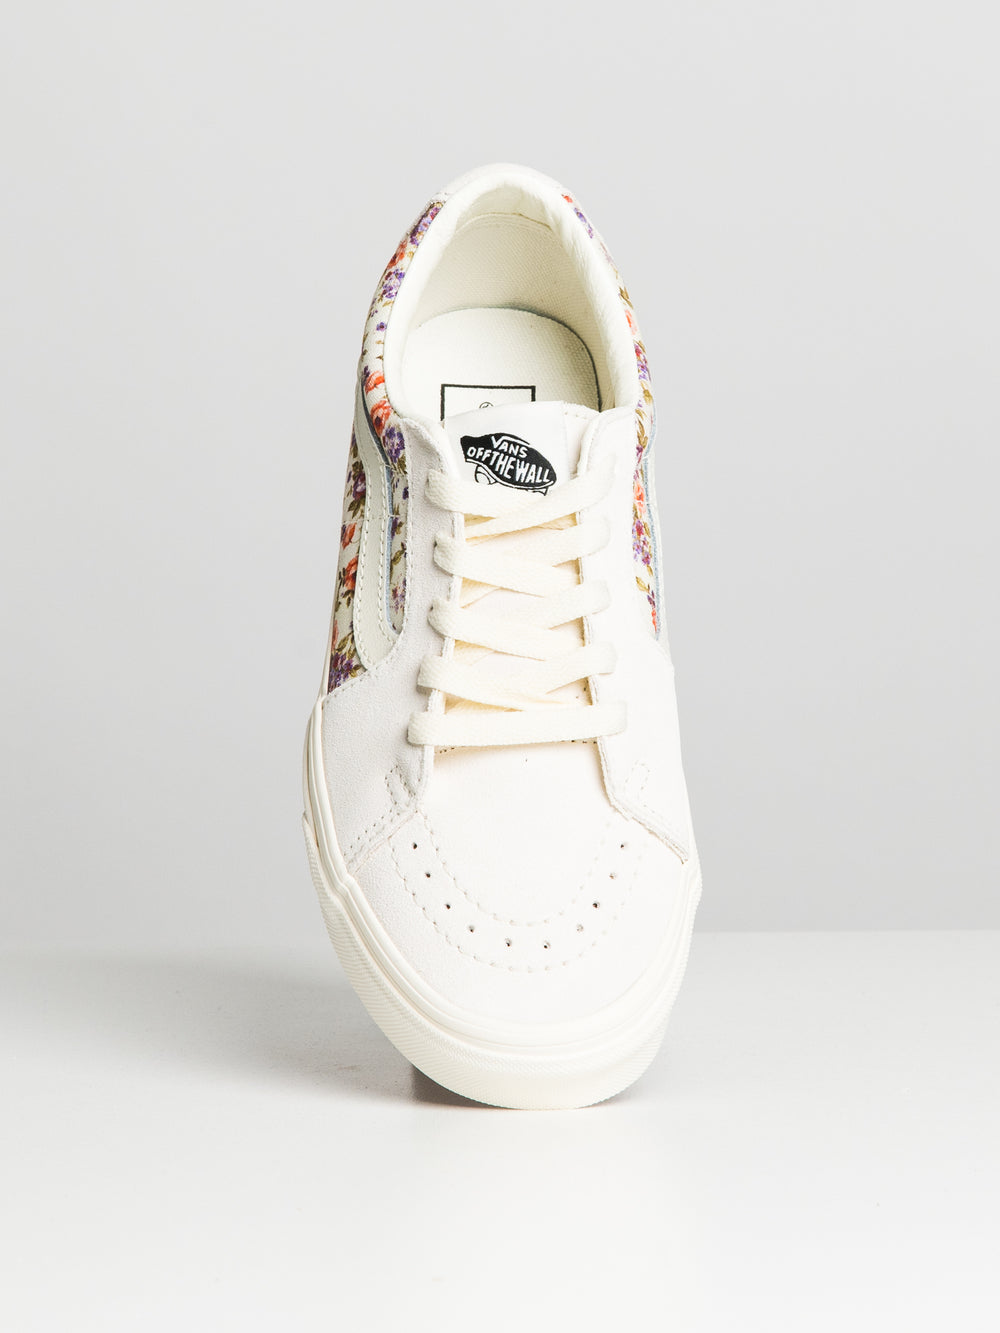 WOMENS VANS SK8 LO - CLEARANCE